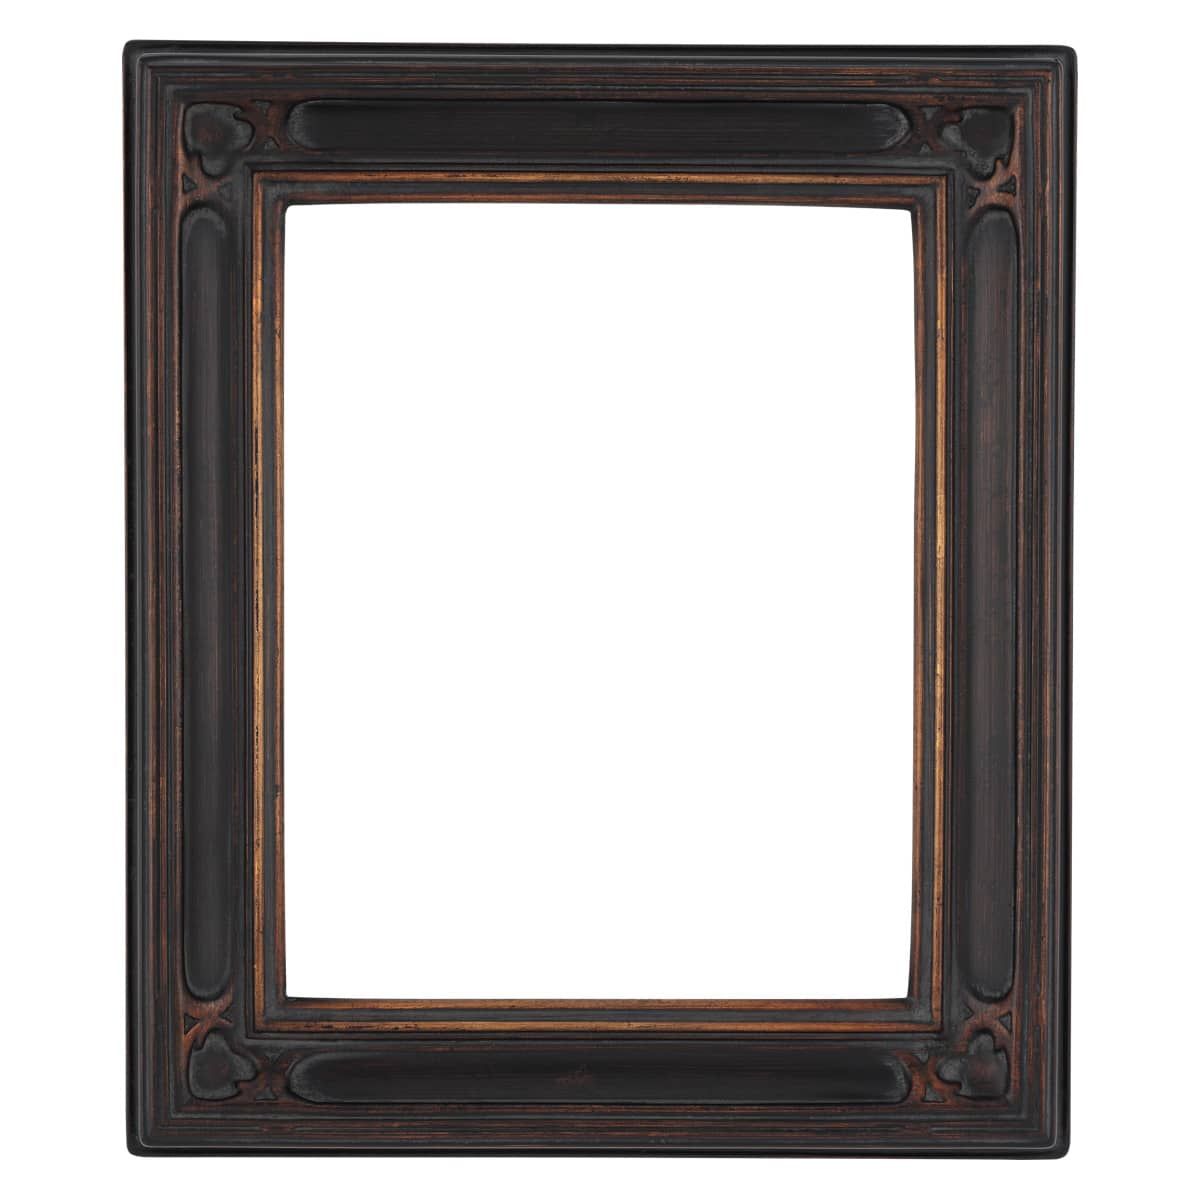 Museum Collection Gothic Frames